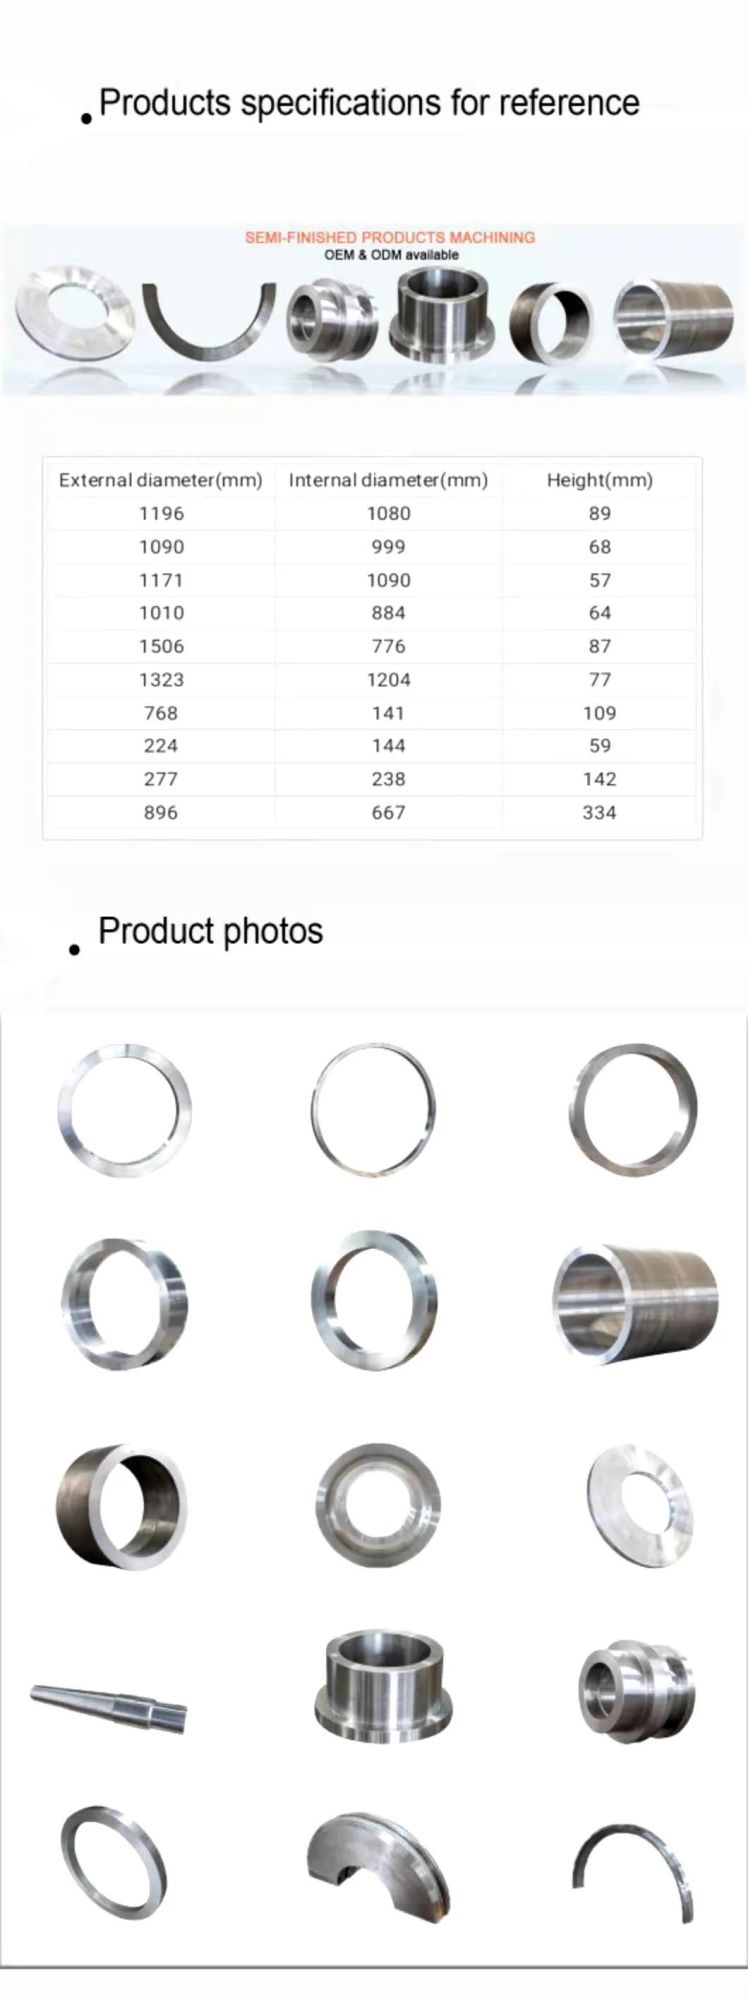 Steel Rolling Knife, Stainless Steel Ring for Chemical, Petroleum Industries